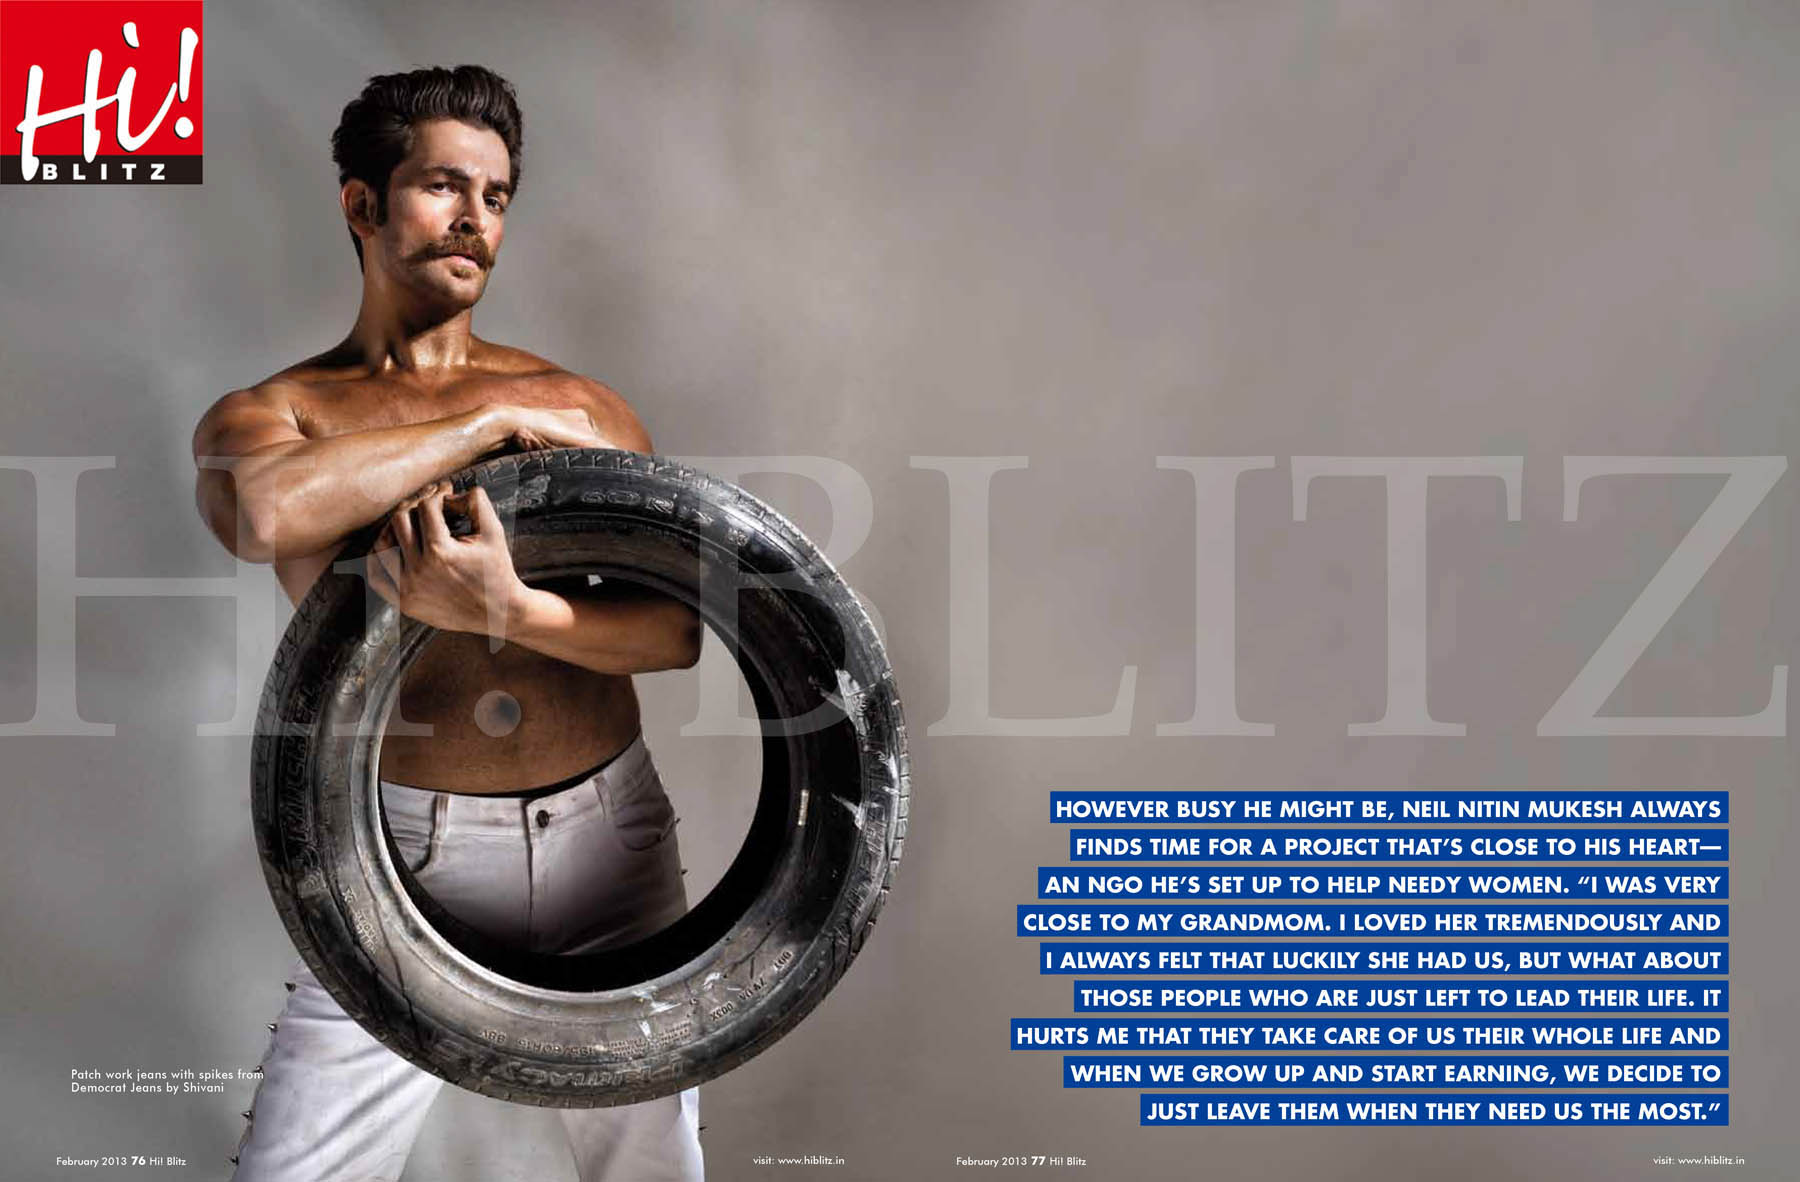 Best Bollywood Photographer in India Vikram Bawa, Actor Neil Nitin Mukesh for Hi Blitz magazine, Editorial, Actors life, Bollywood, Shooting with Star, Style, Published Photographer, Celebrity Photoshoot, Best Editorial Photographer by Vikram Bawa, Best Fashion Photographer  Vikram Bawa, Mumbai, India